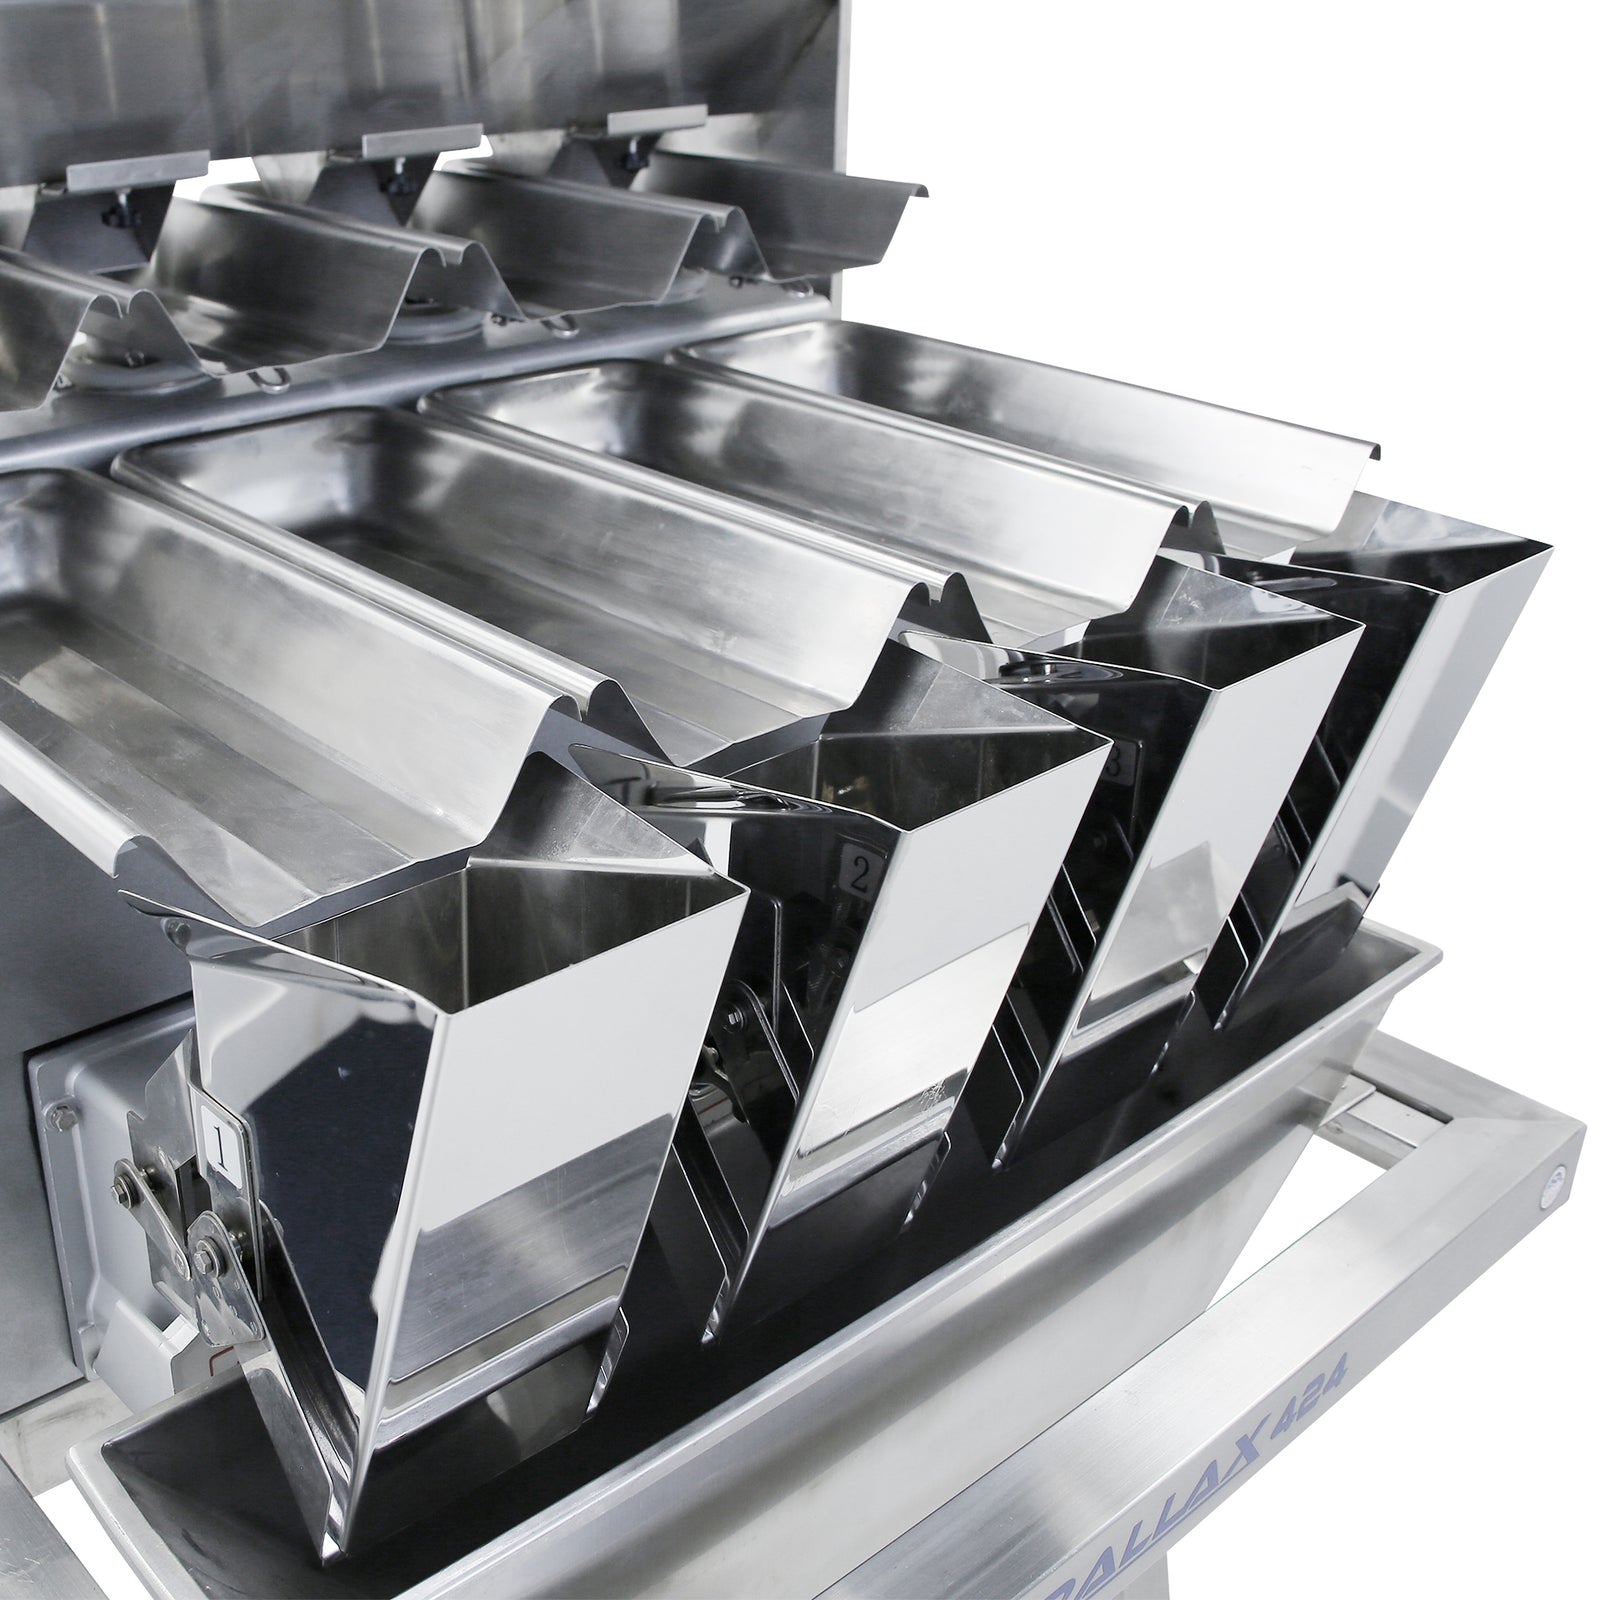 closeup of the vibratory trays of the Jorestech stainless steel 4 head linear weigher